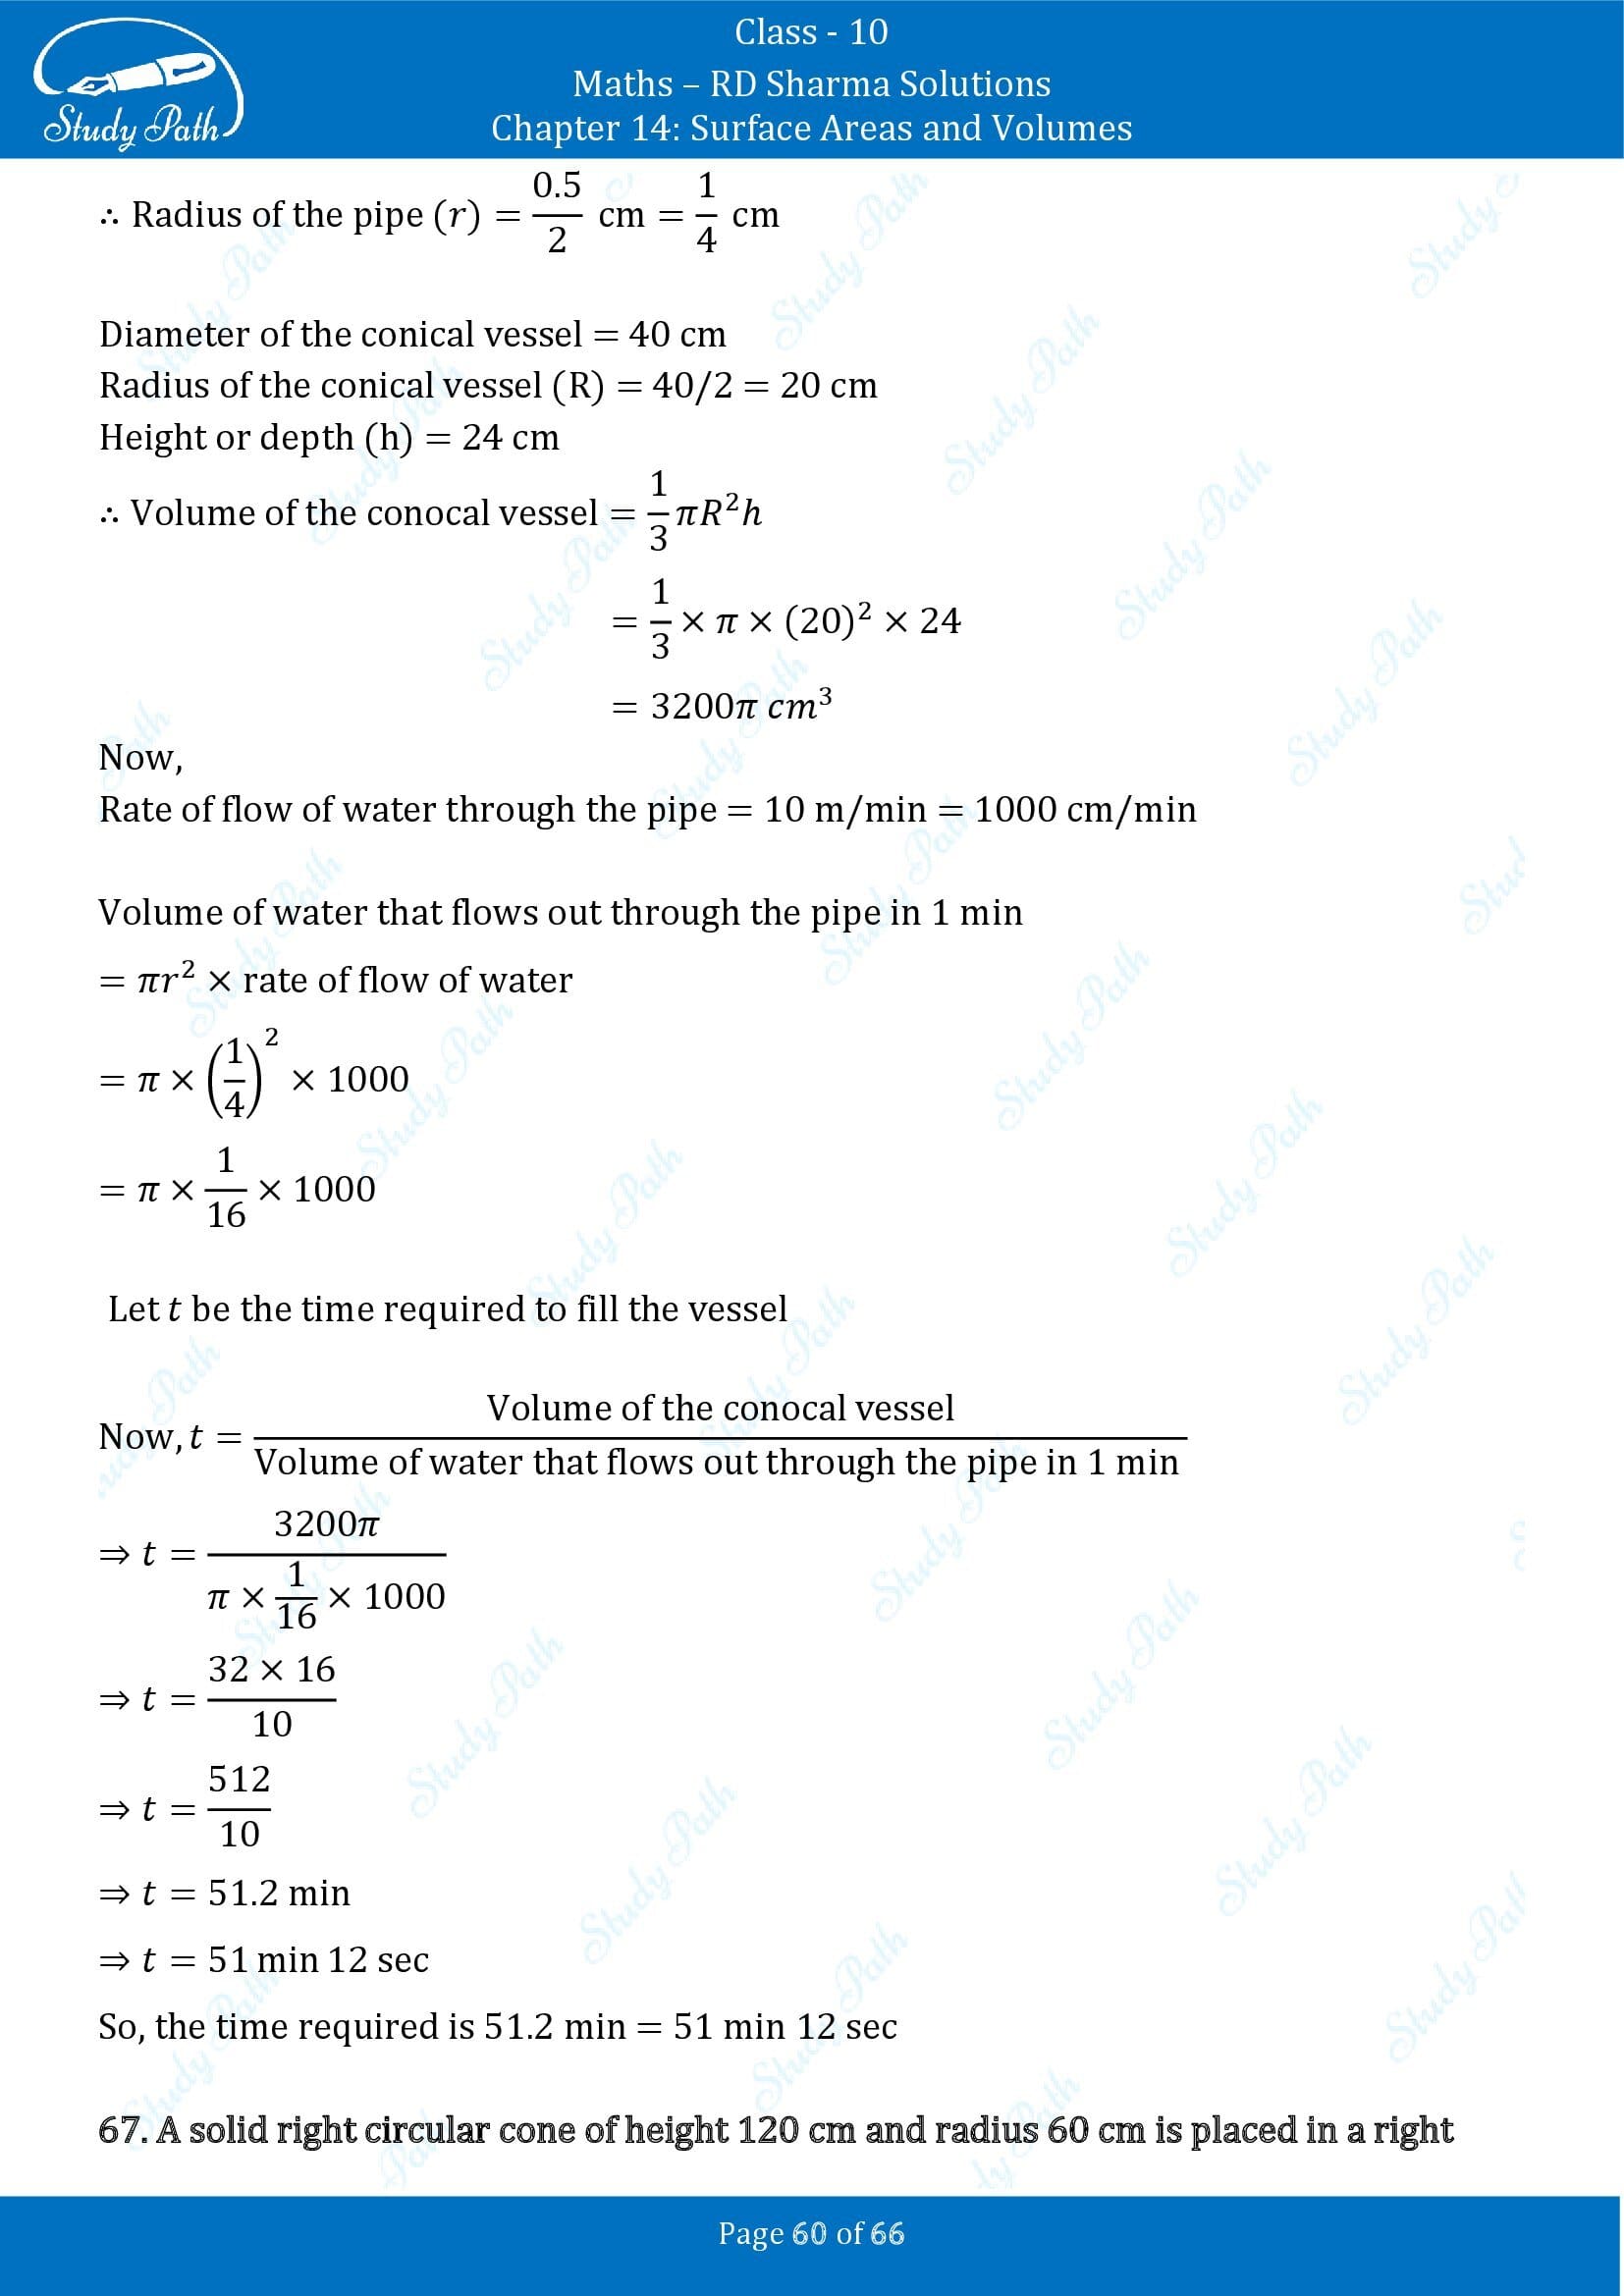 RD Sharma Solutions Class 10 Chapter 14 Surface Areas and Volumes Exercise 14.1 00060